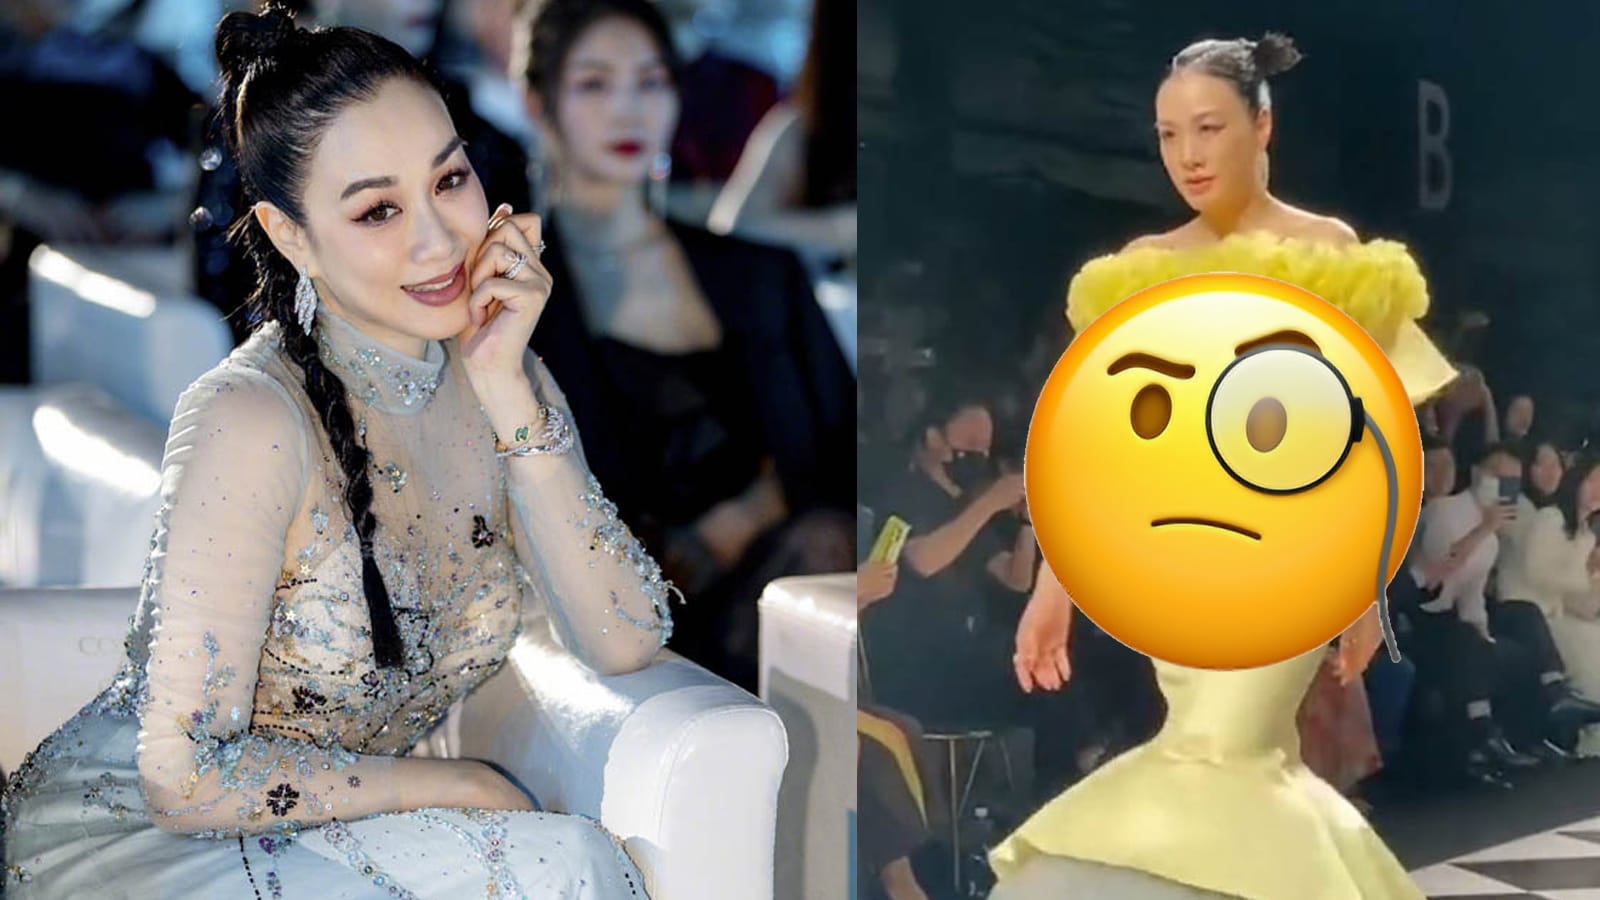 Netizens Praise Christy Chung, 50, For Not Conforming To “Outdated Beauty Standards” After She Gets Criticised For Looking “Out Of Shape”